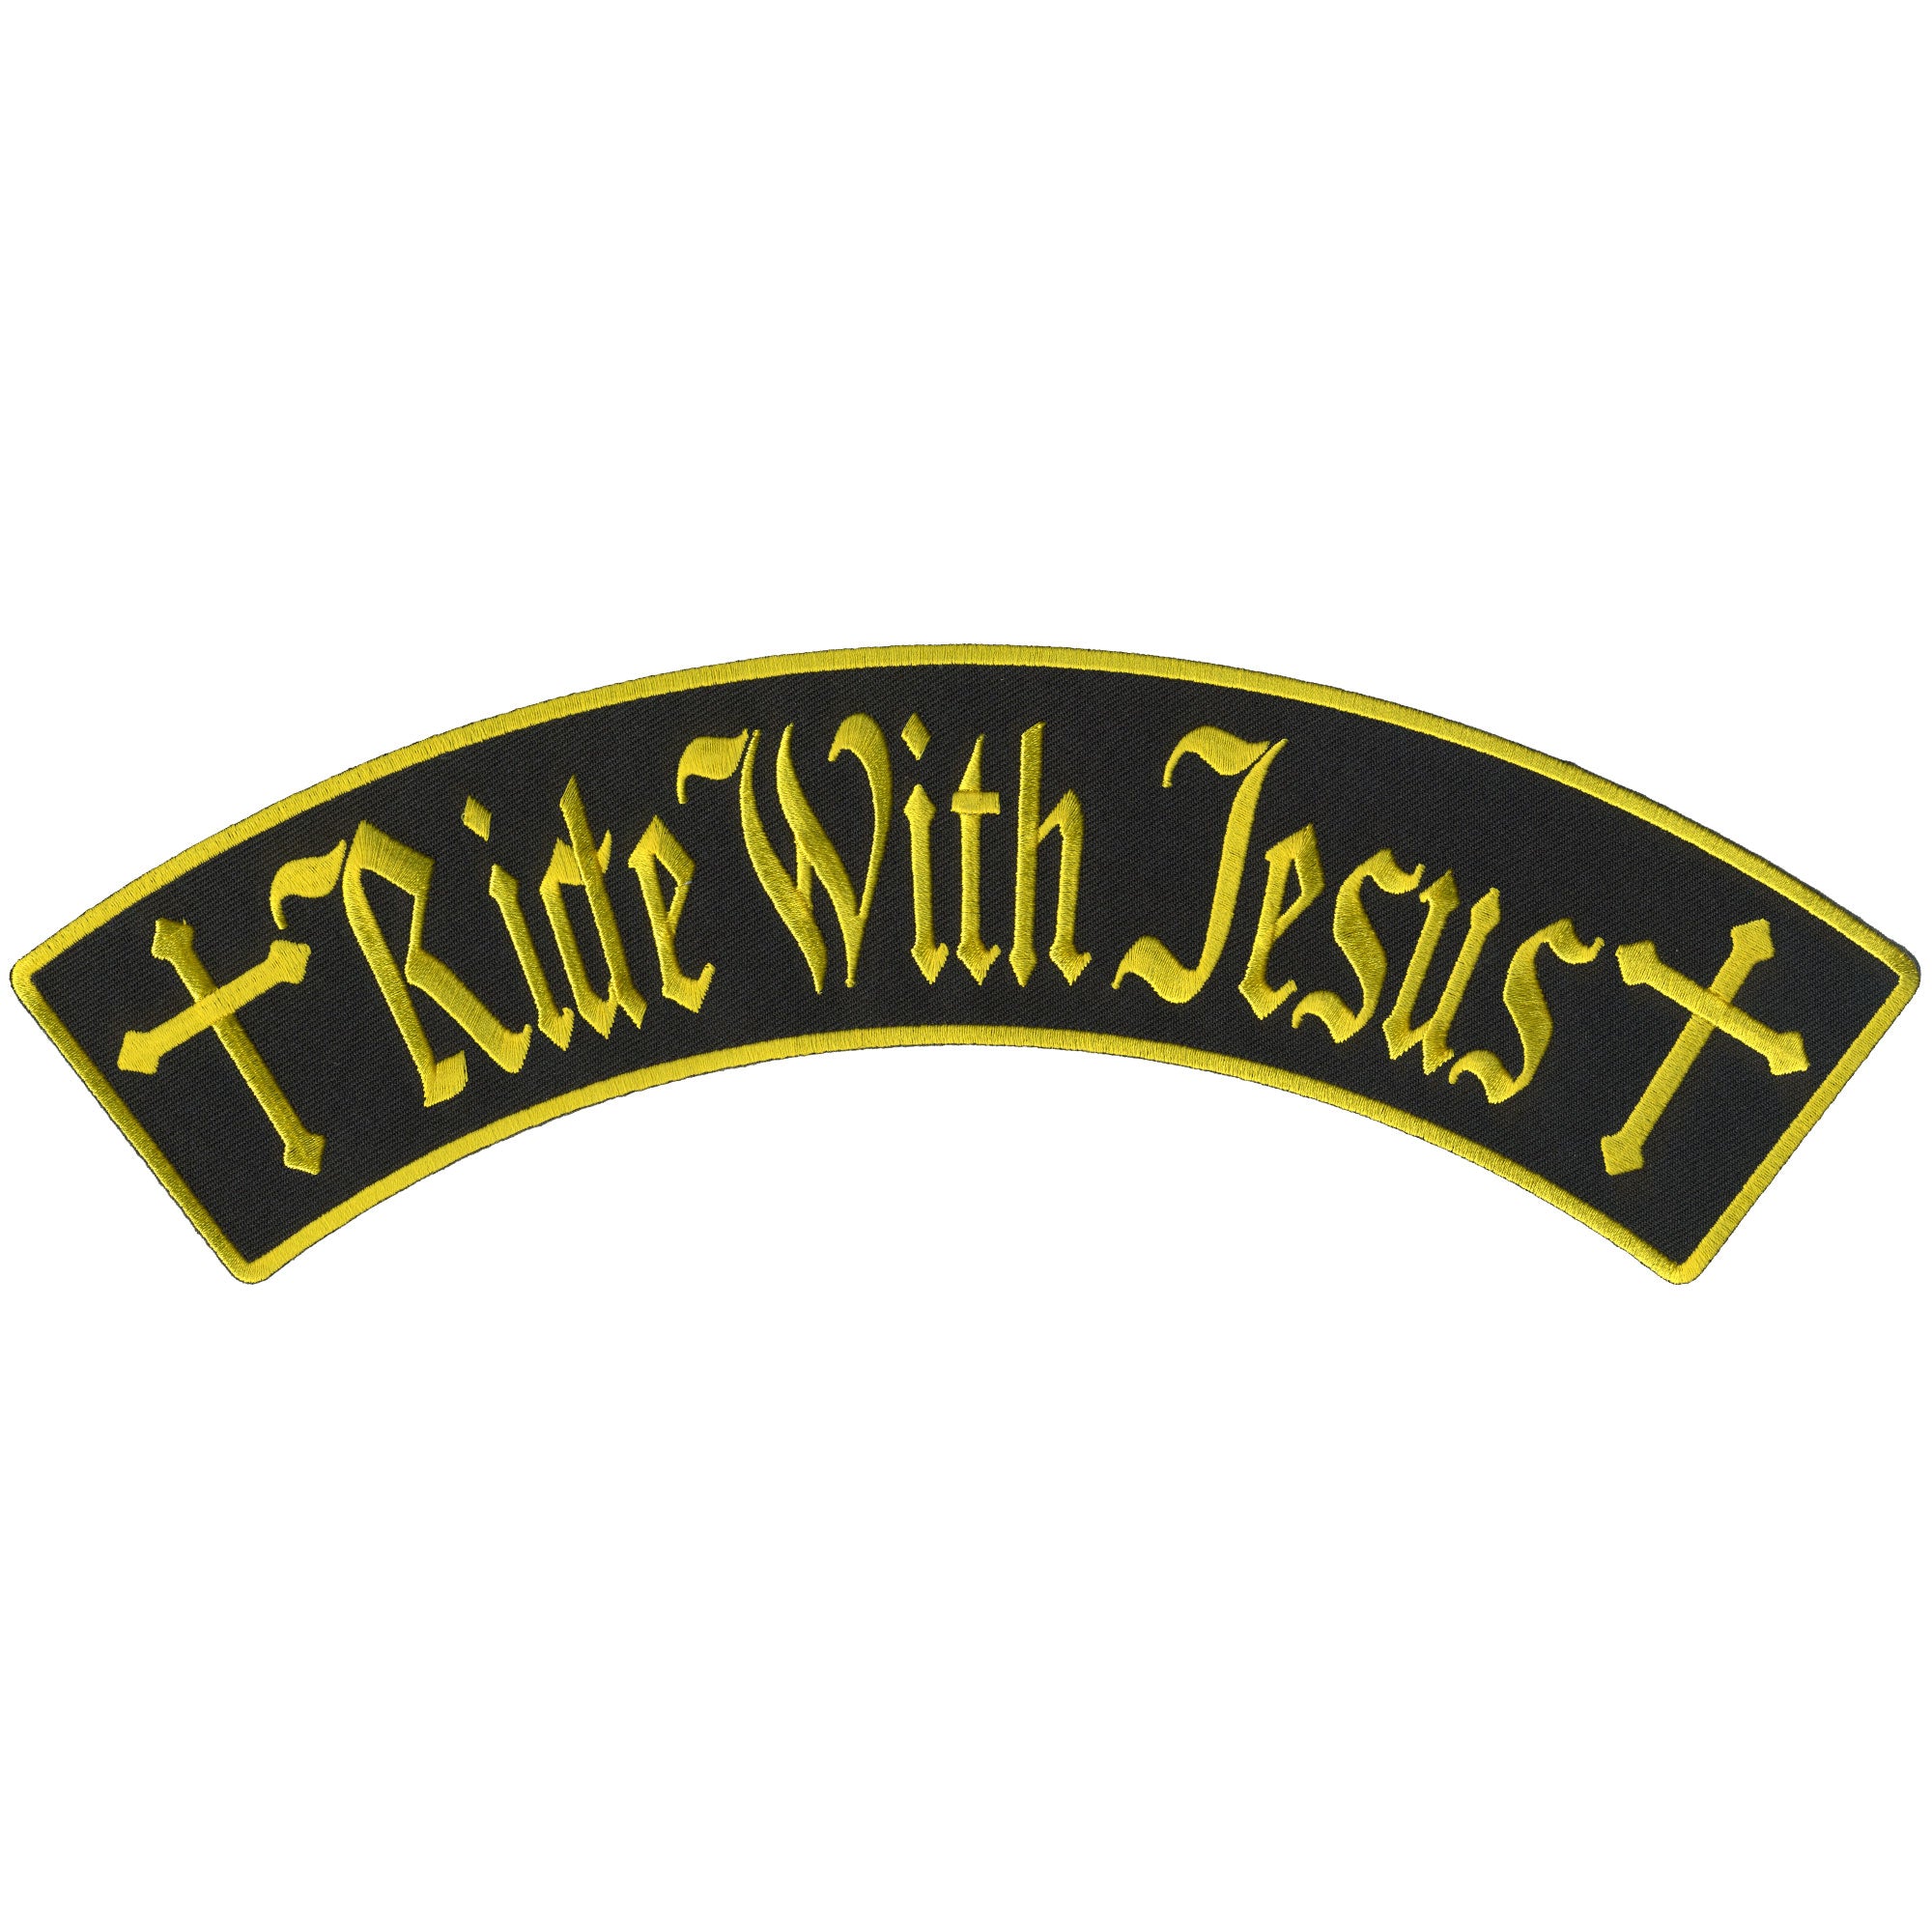 Hot Leathers Ride With Jesus 12" X 3" Top Rocker Patch